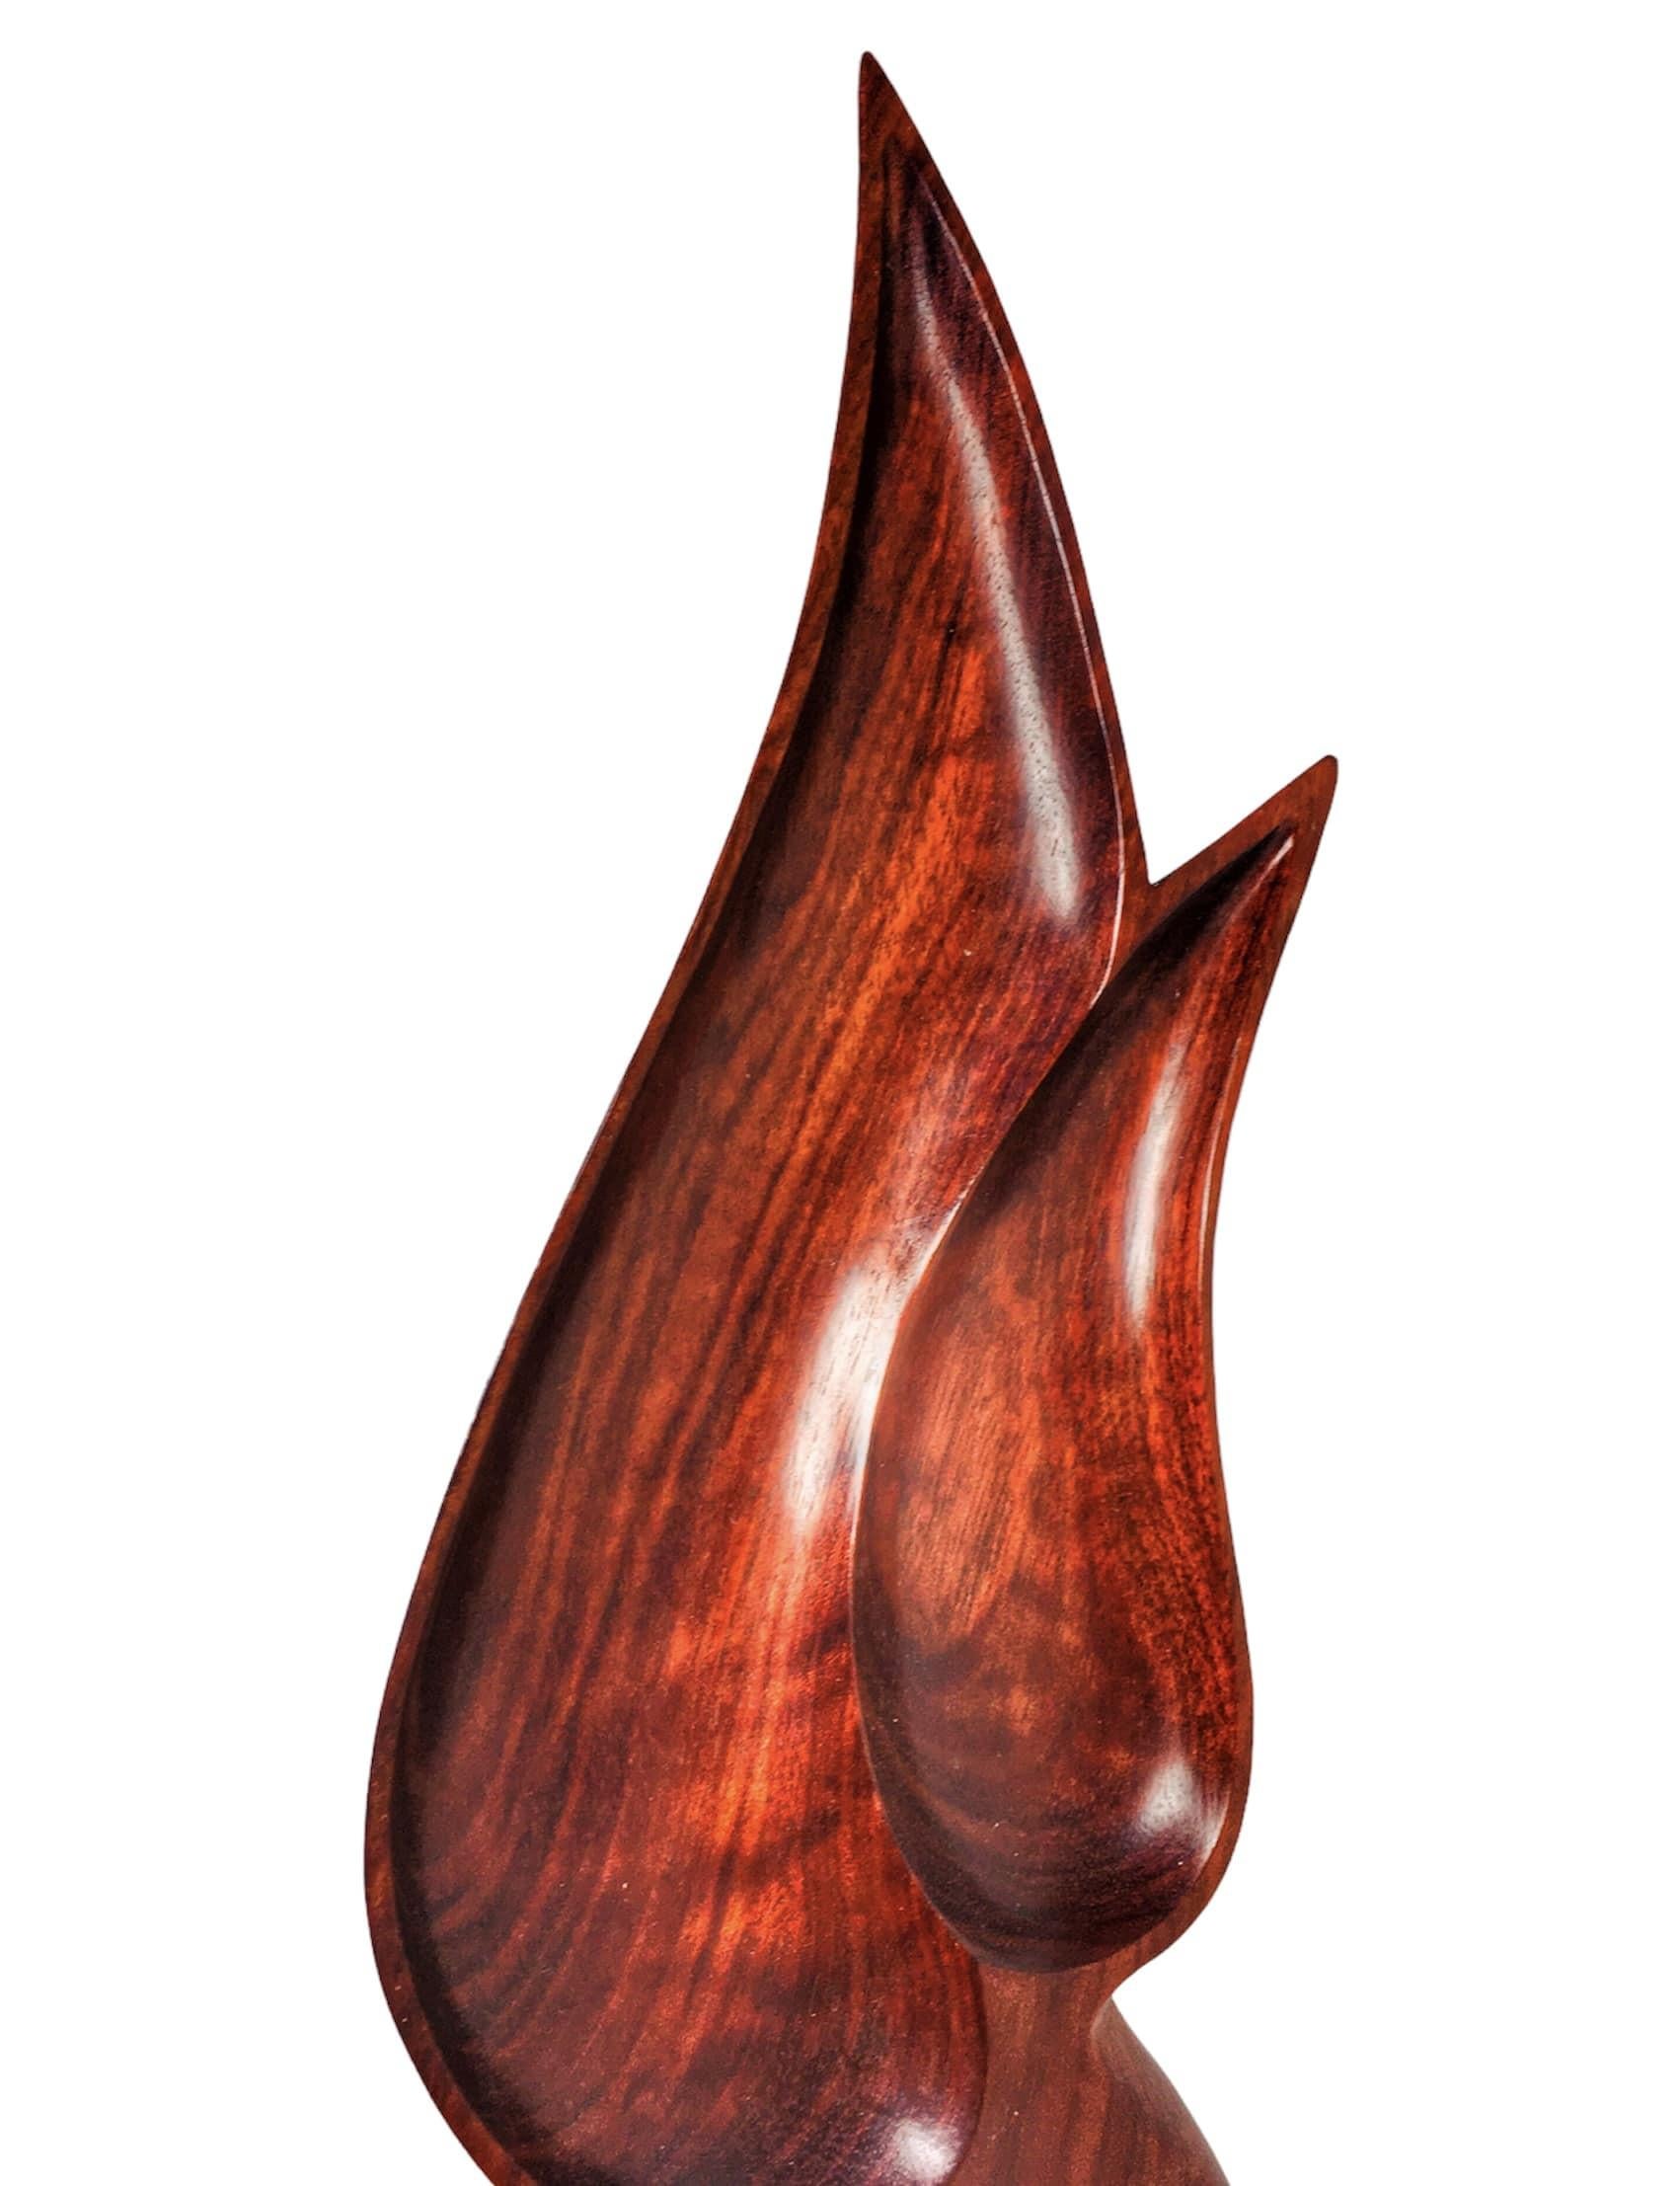 Mid-Century Modern Vintage Toucan Shaped Teak Wood Serving Tray, Snack Bowl For Sale